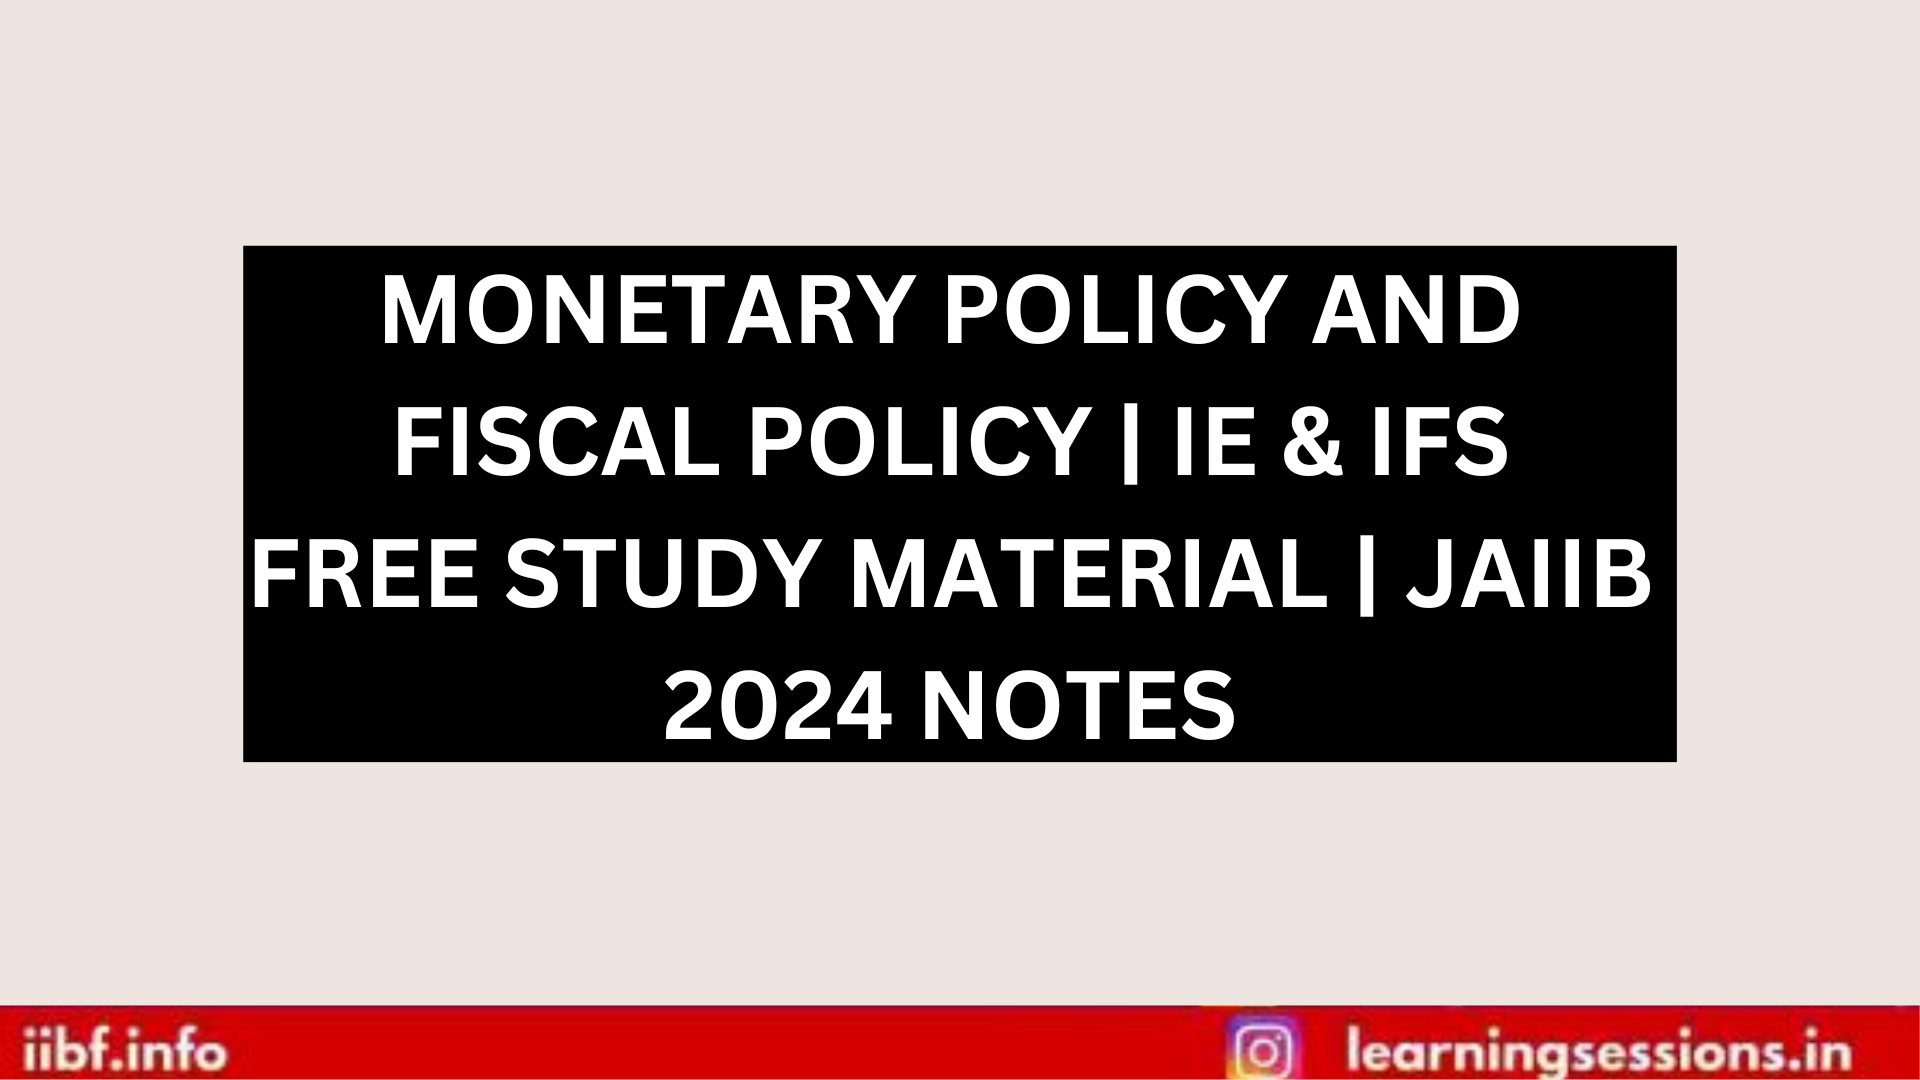 MONETARY POLICY AND FISCAL POLICY | IE & IFS FREE STUDY MATERIAL | JAIIB 2024 NOTES